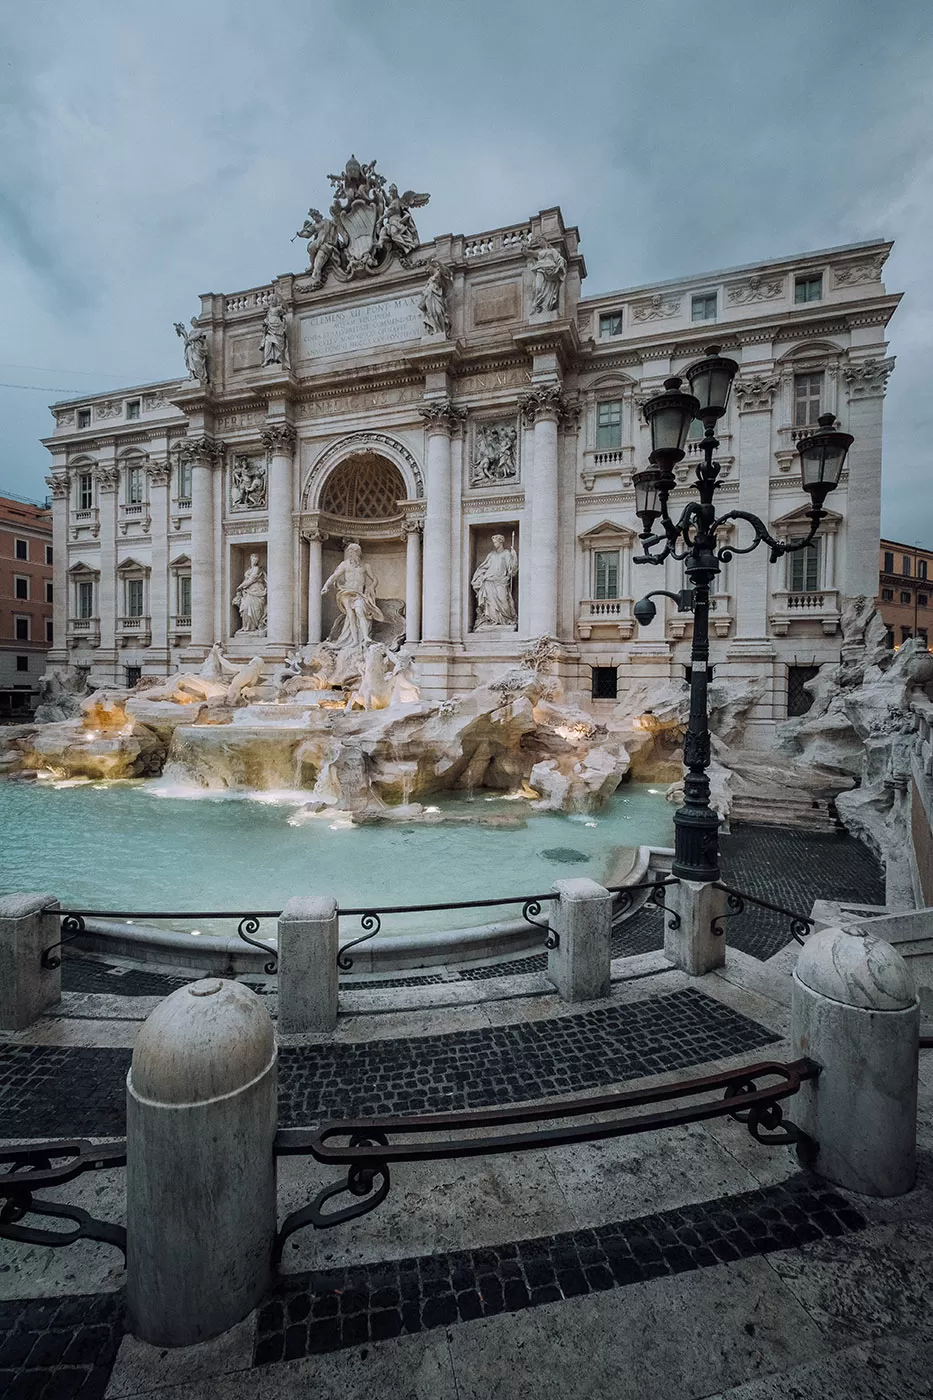 BEST HOTELS Near the Trevi Fountain in Rome - Trevi Fountain no crowds